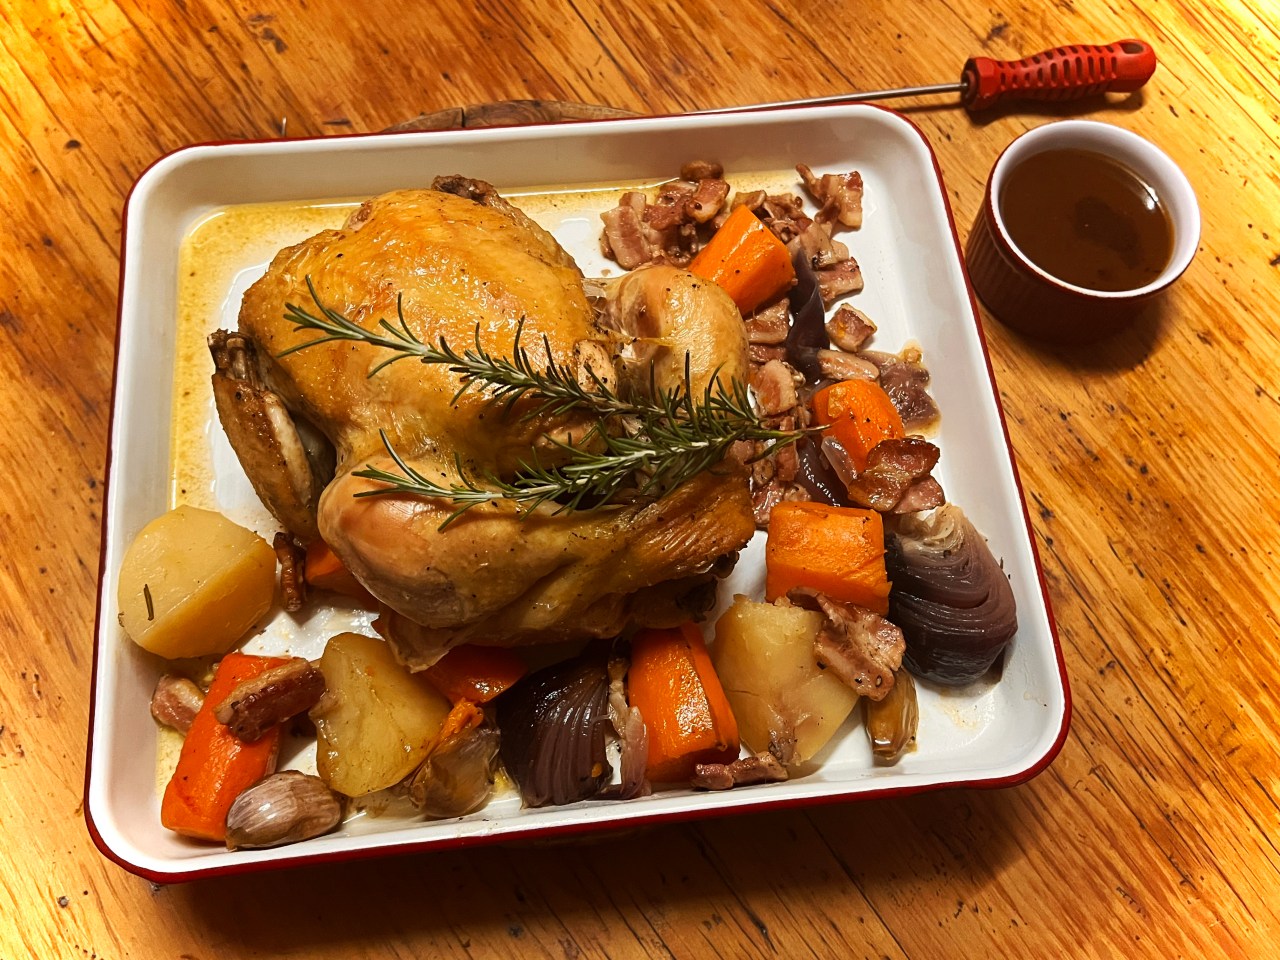 ONE POT WONDER: What’s cooking today: Chicken & vegetable pot roast